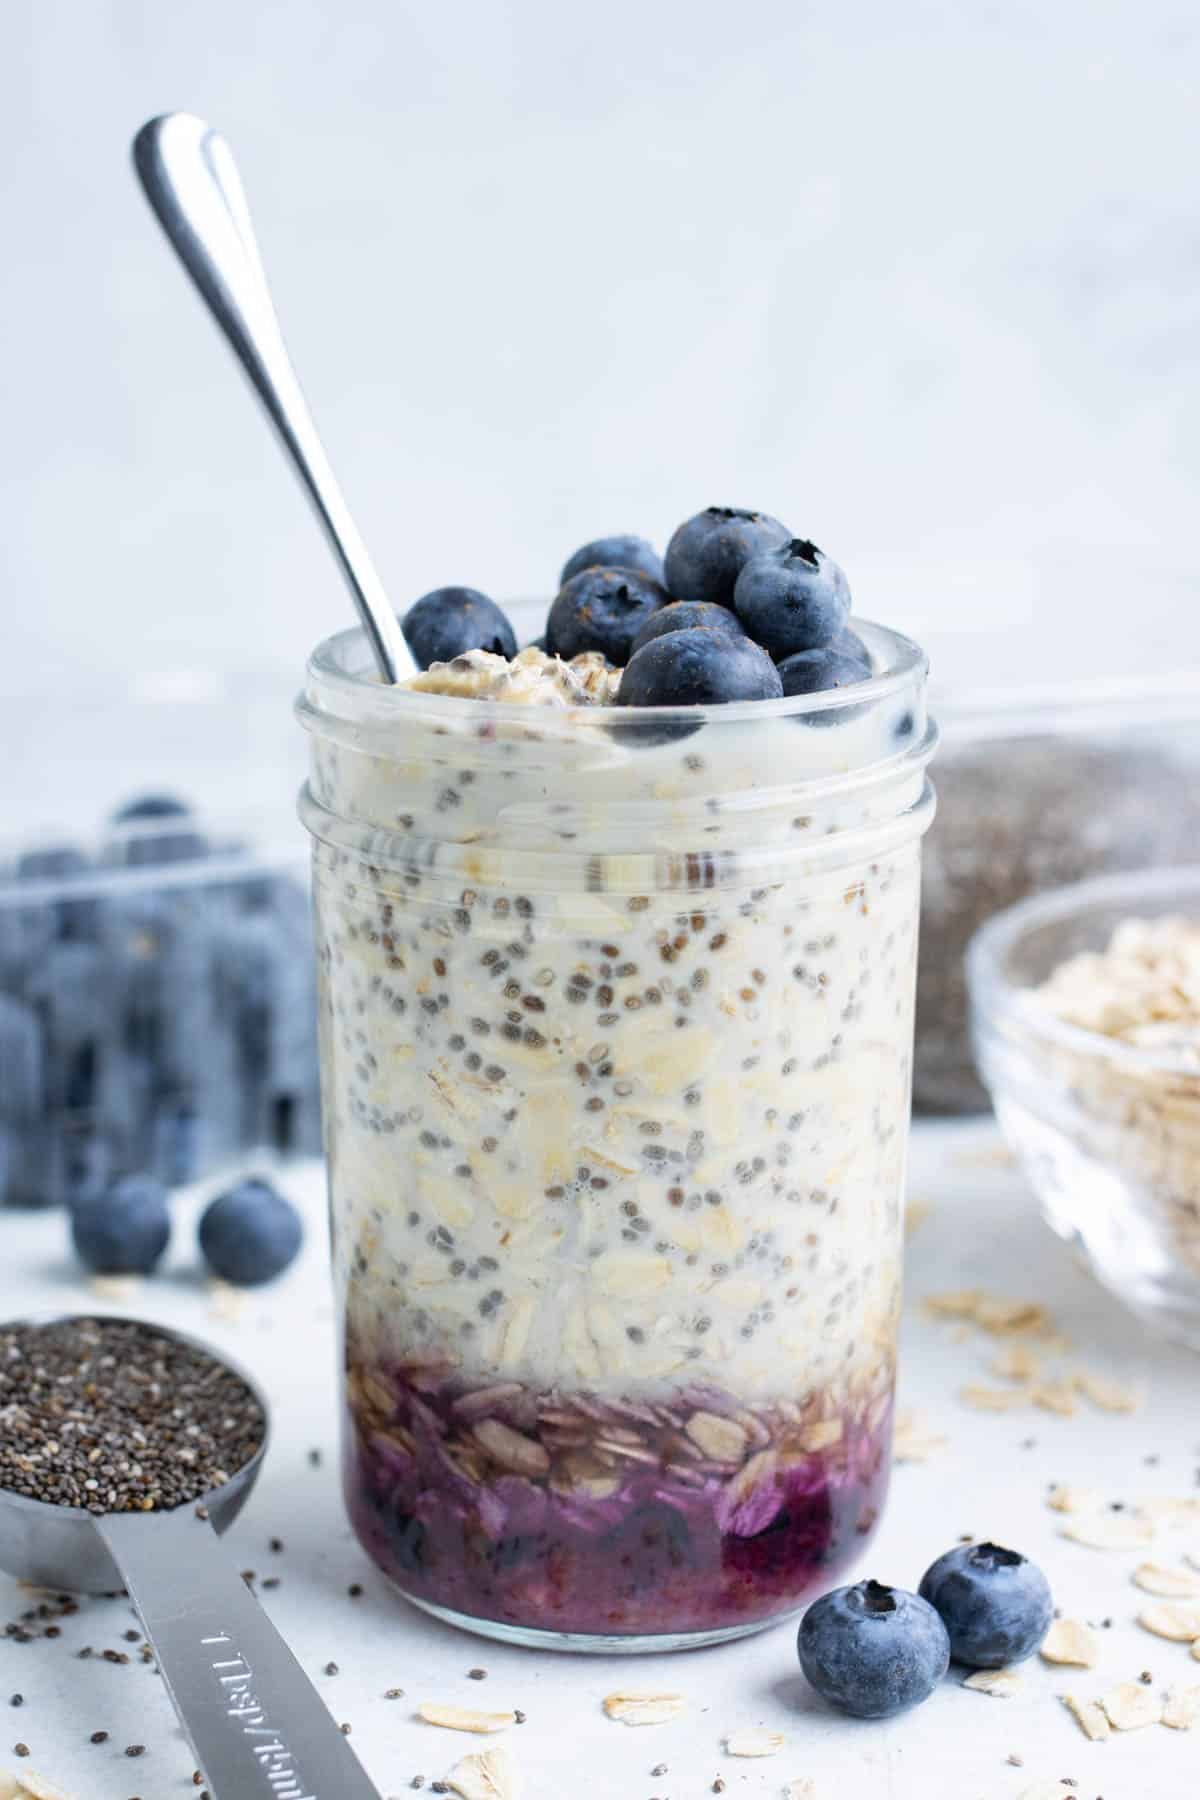 Jammy blueberries are the perfect addition to overnight oats.